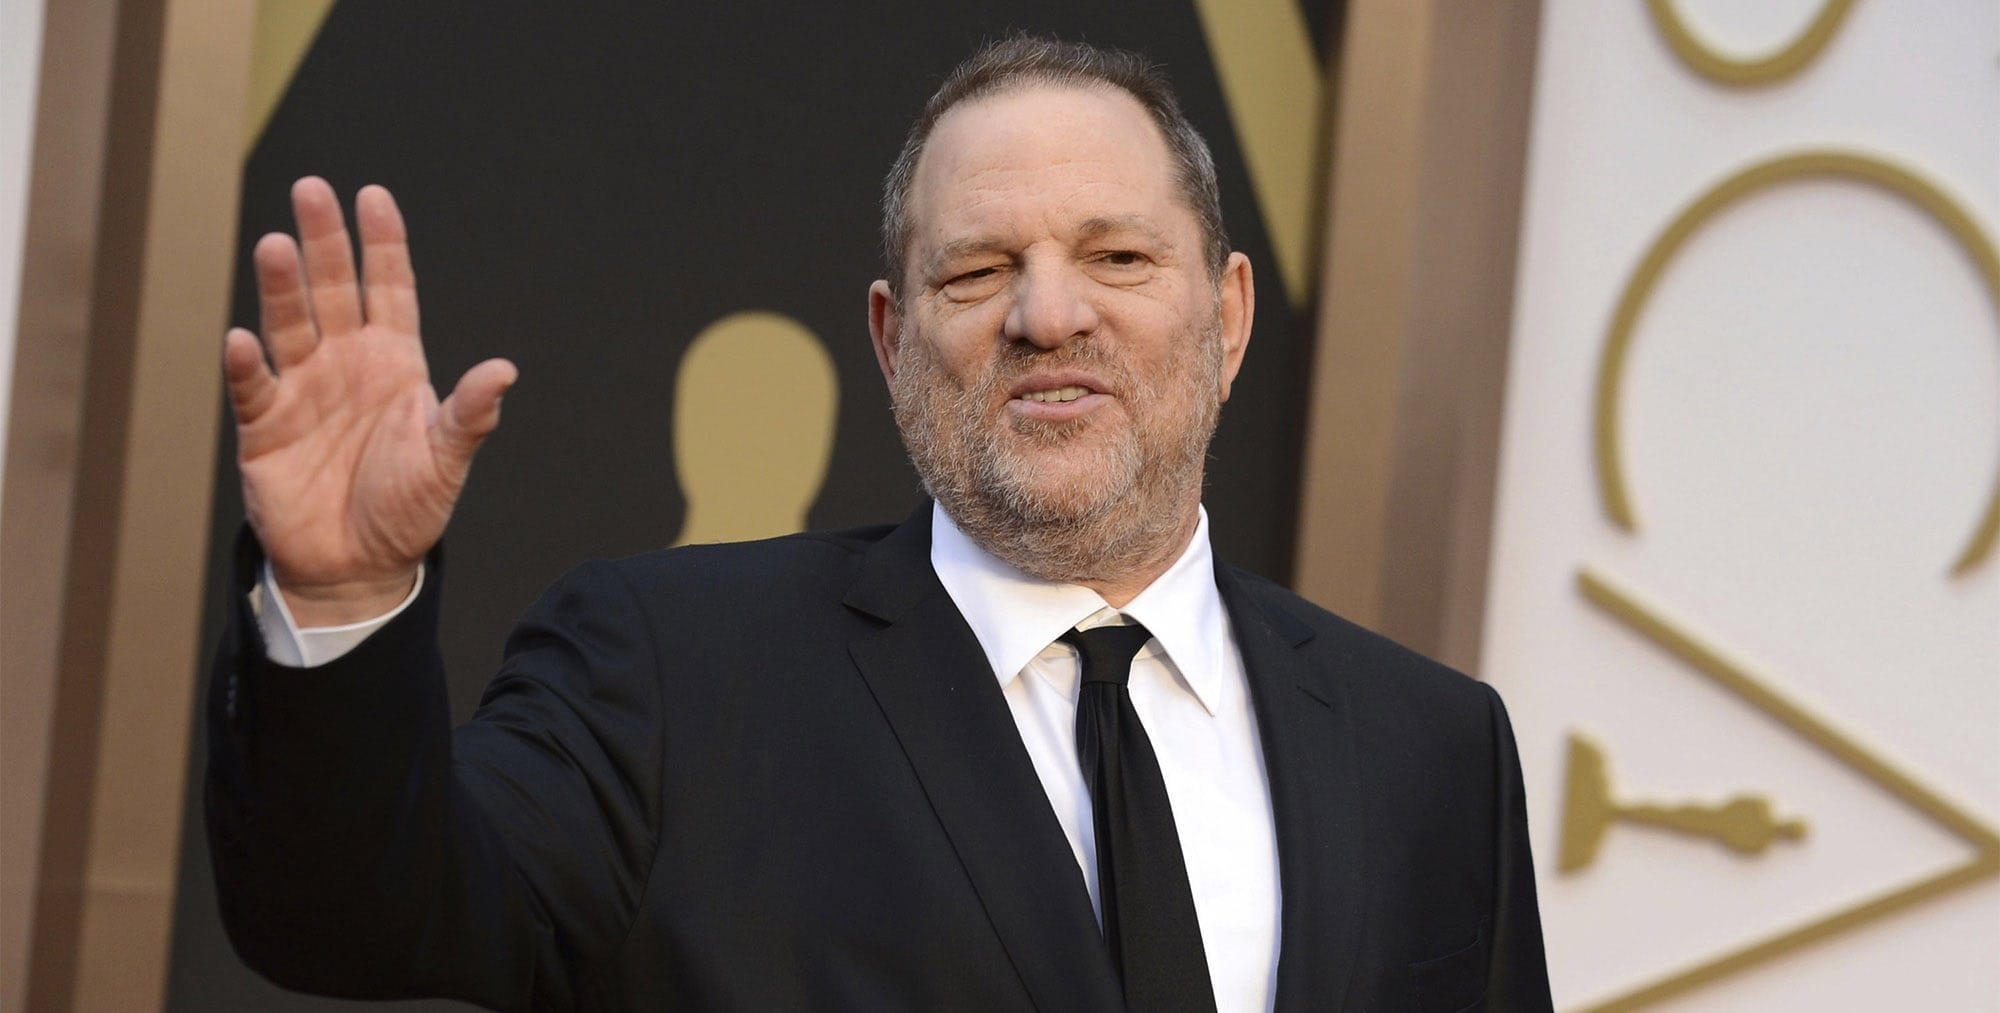 The Harvey Weinstein case may land the disgraced movie mogul behind bars, and creators are clambering over each other to tell the story of his demise.